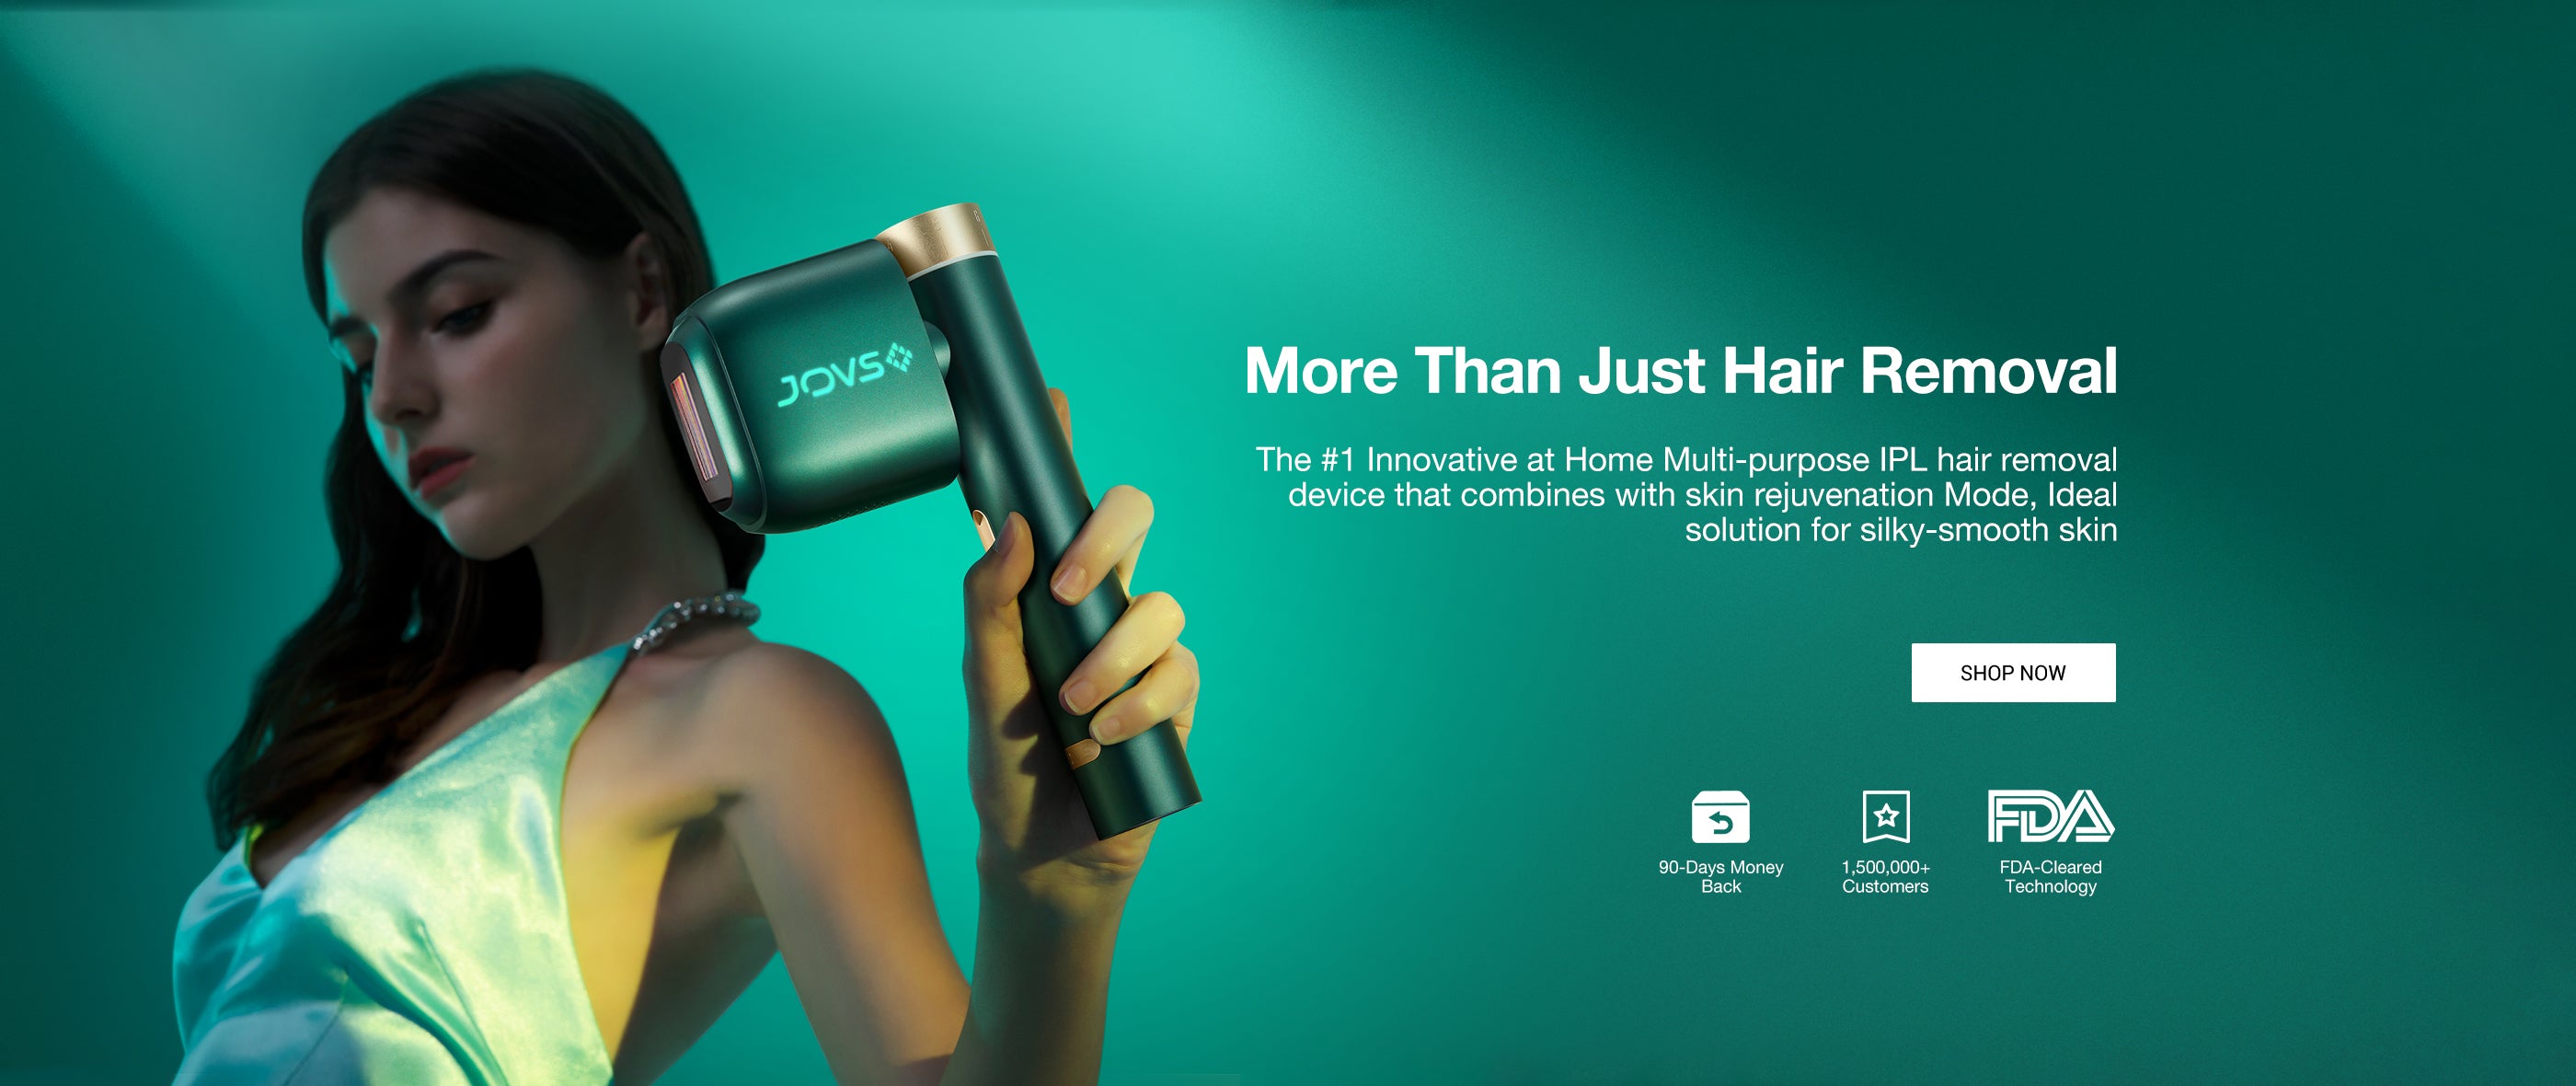 JOVS Venus Pro II IPL Hair Removal Device with skin rejuvenation mode for the perfect at-home solution to smooth skin.